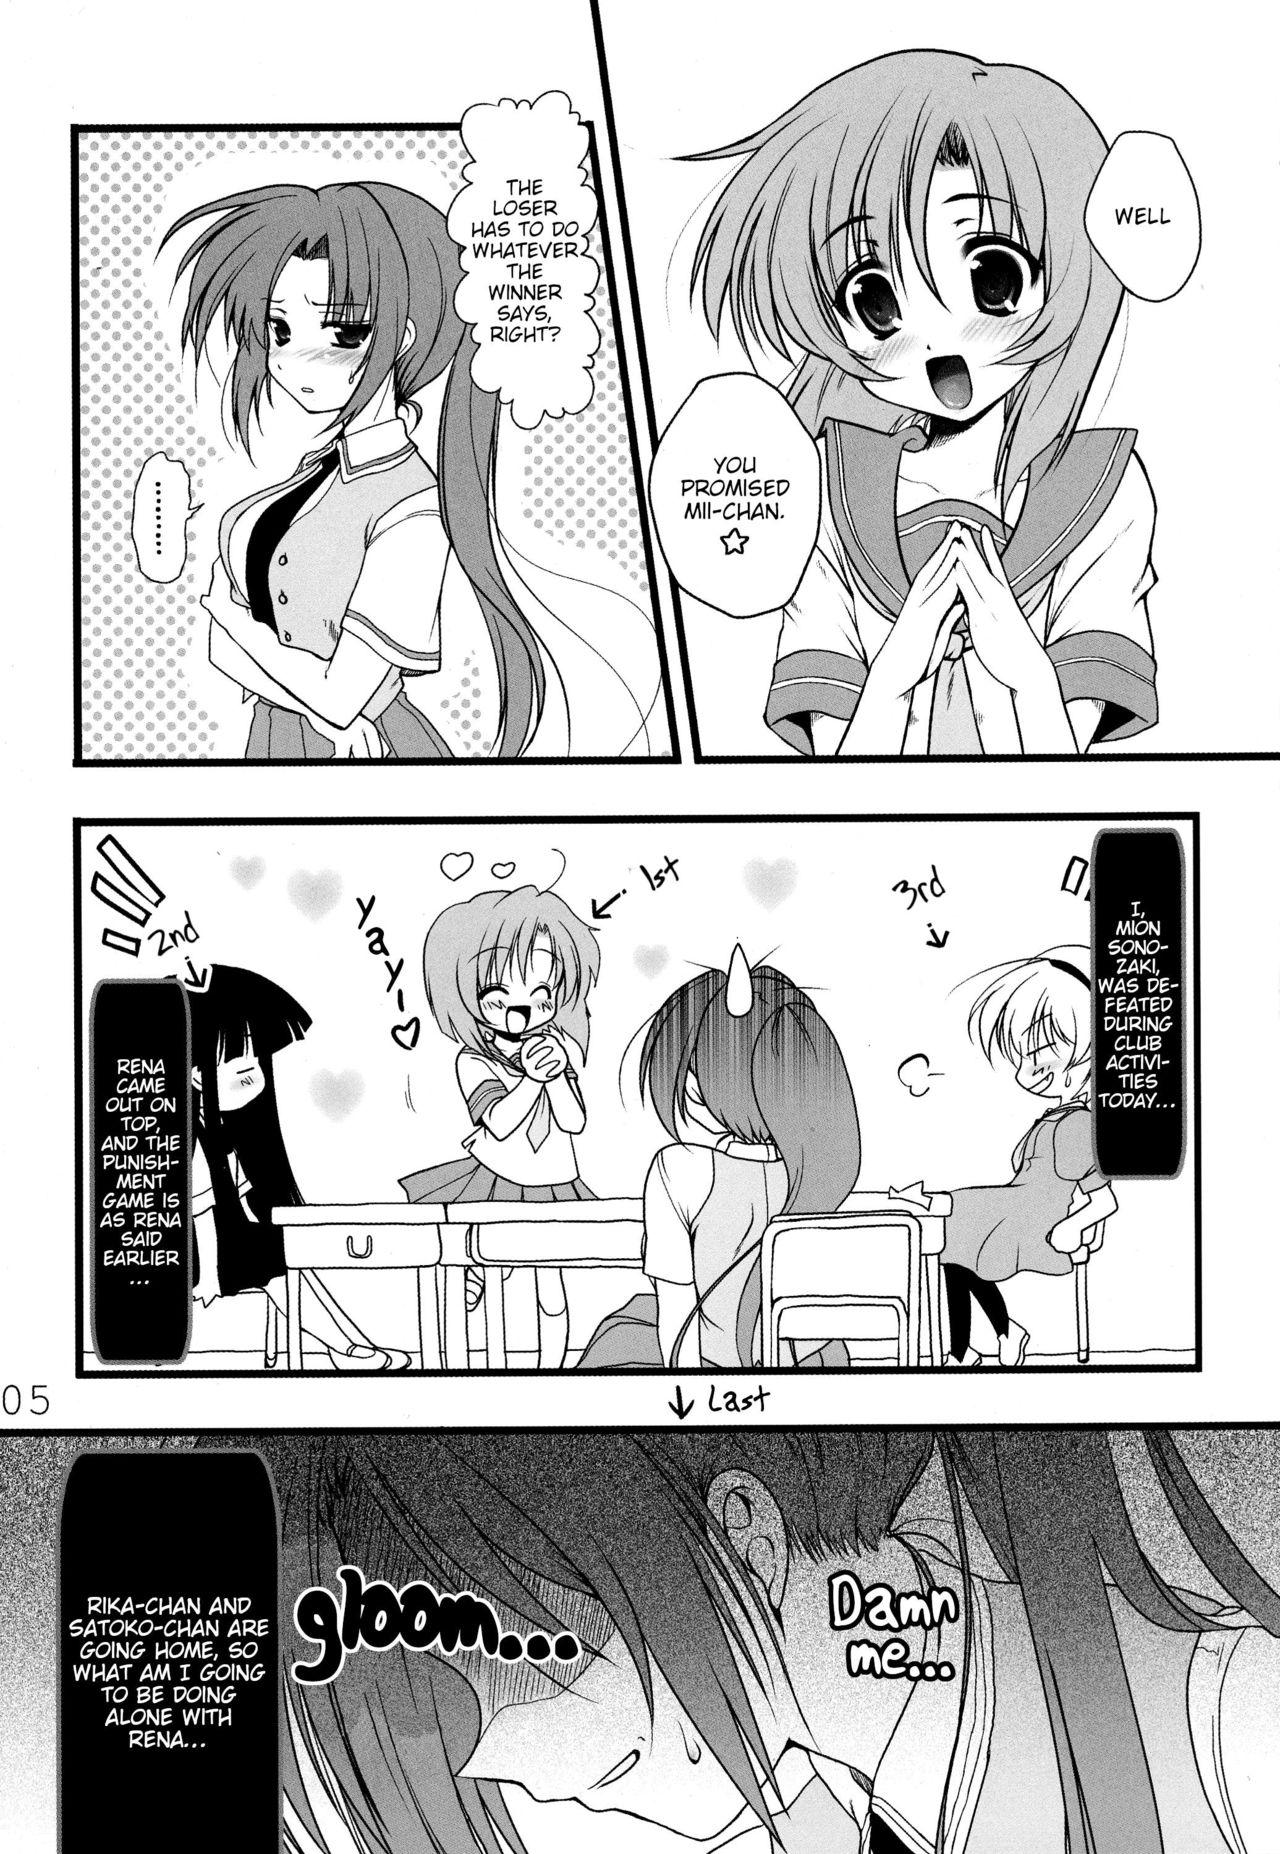 Best Blowjobs Ever Mion to Osanpo. - Higurashi no naku koro ni | when they cry Amature Sex - Page 5